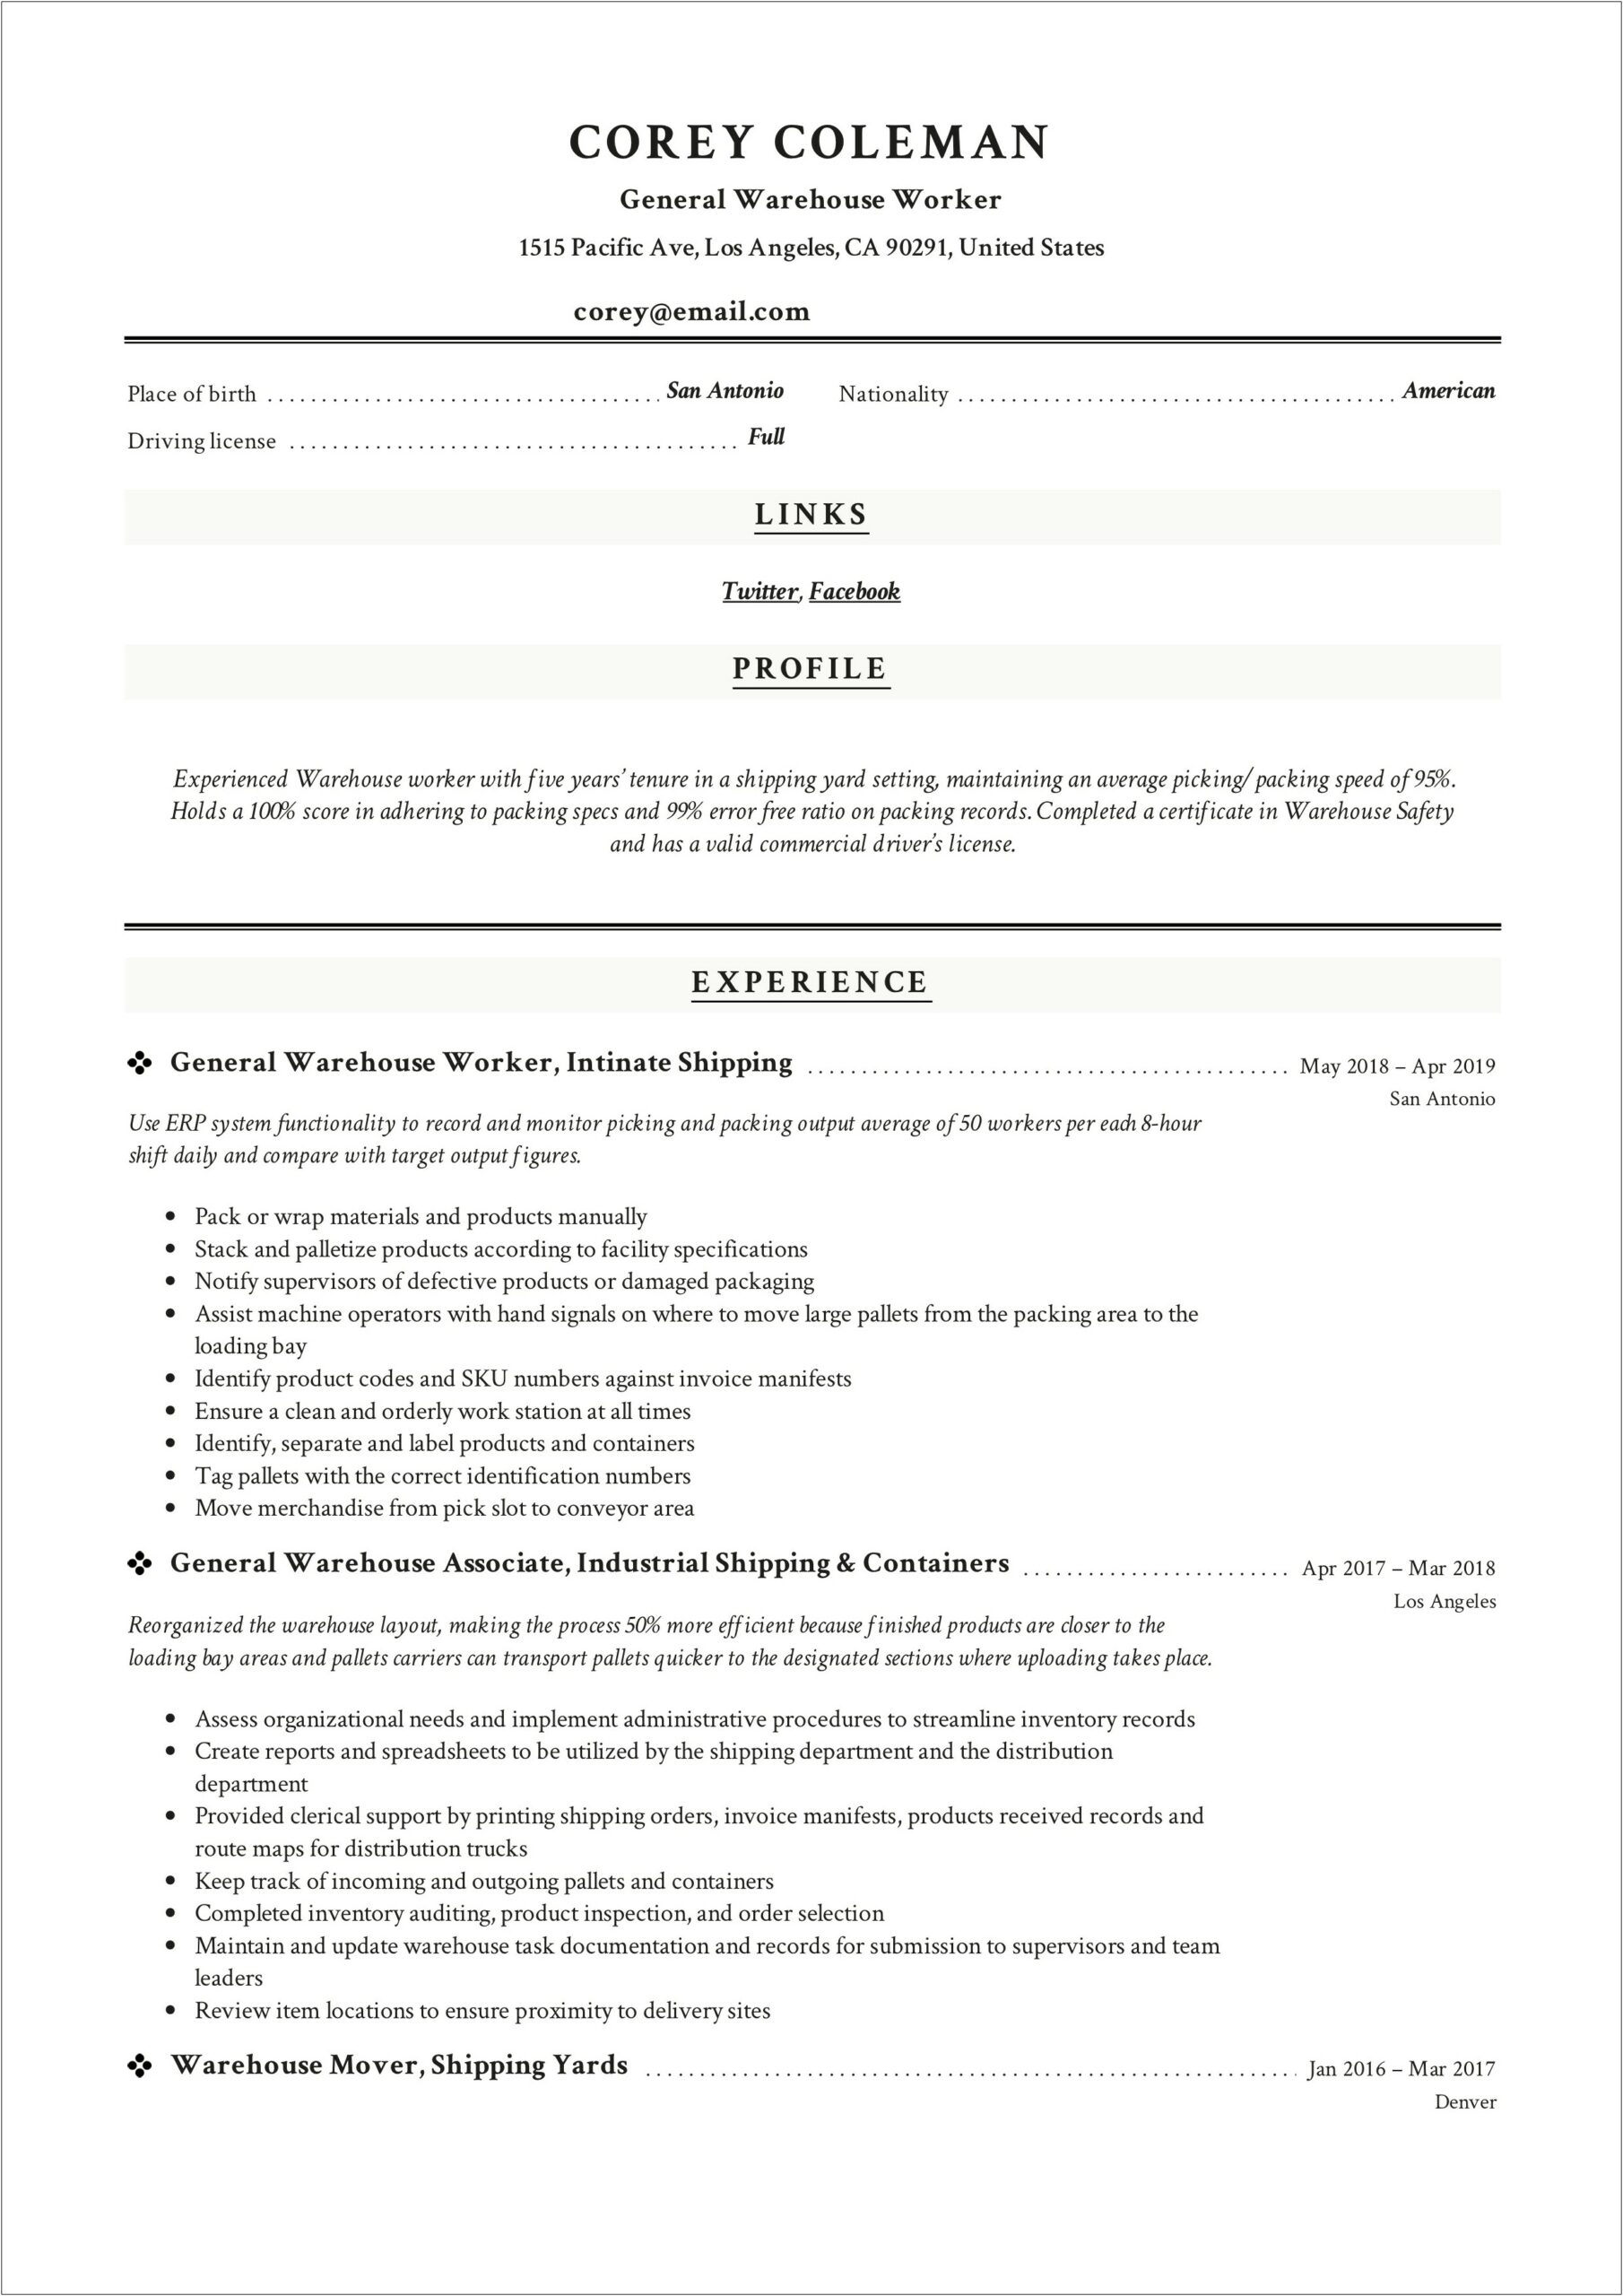 Free Sample Resume For Warehouse Position